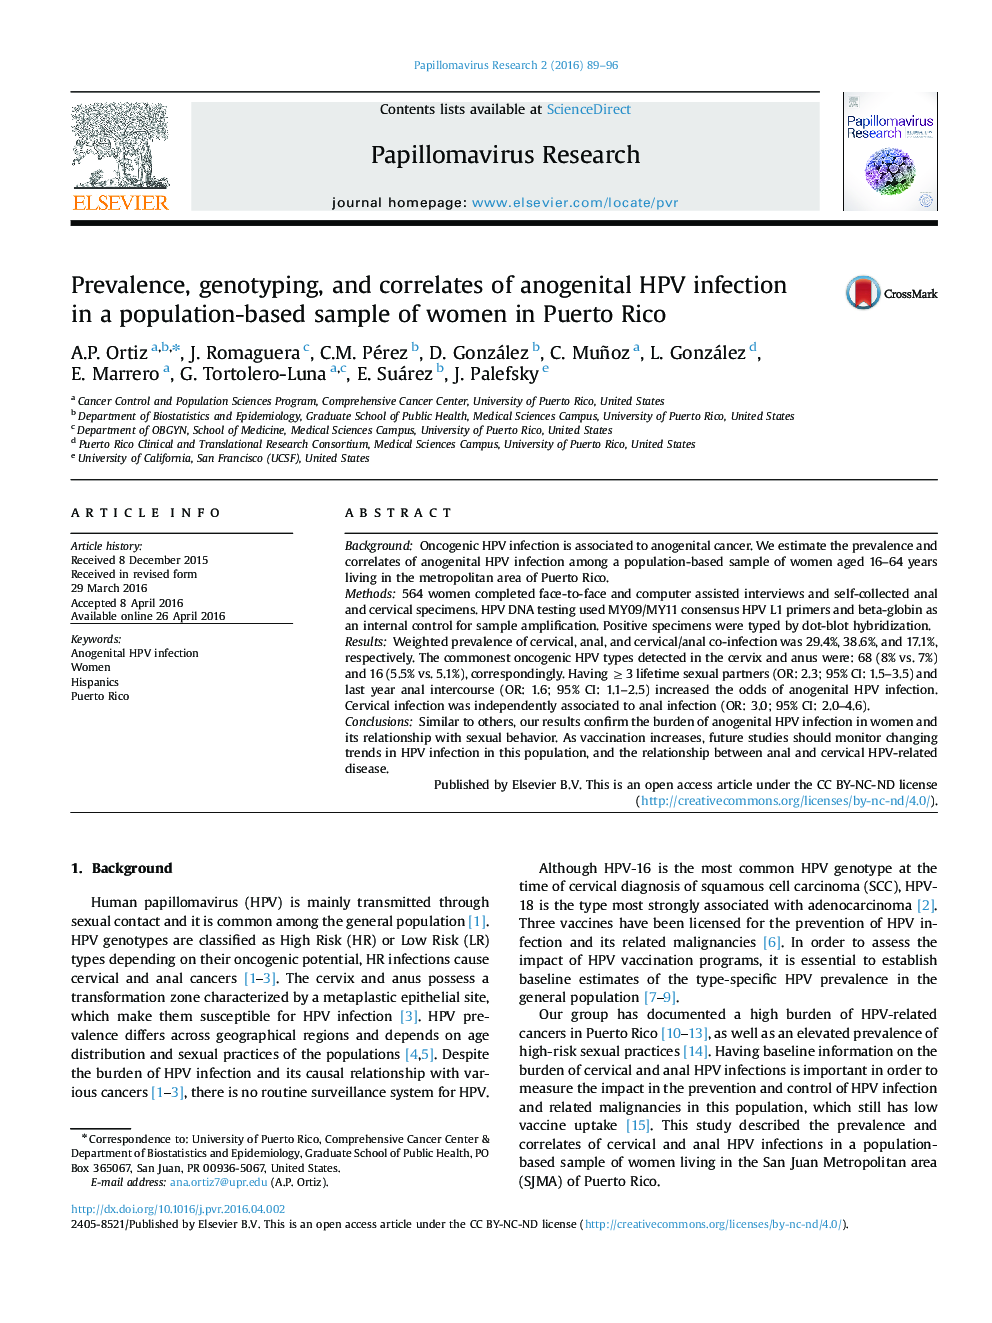 Prevalence, genotyping, and correlates of anogenital HPV infection in a population-based sample of women in Puerto Rico